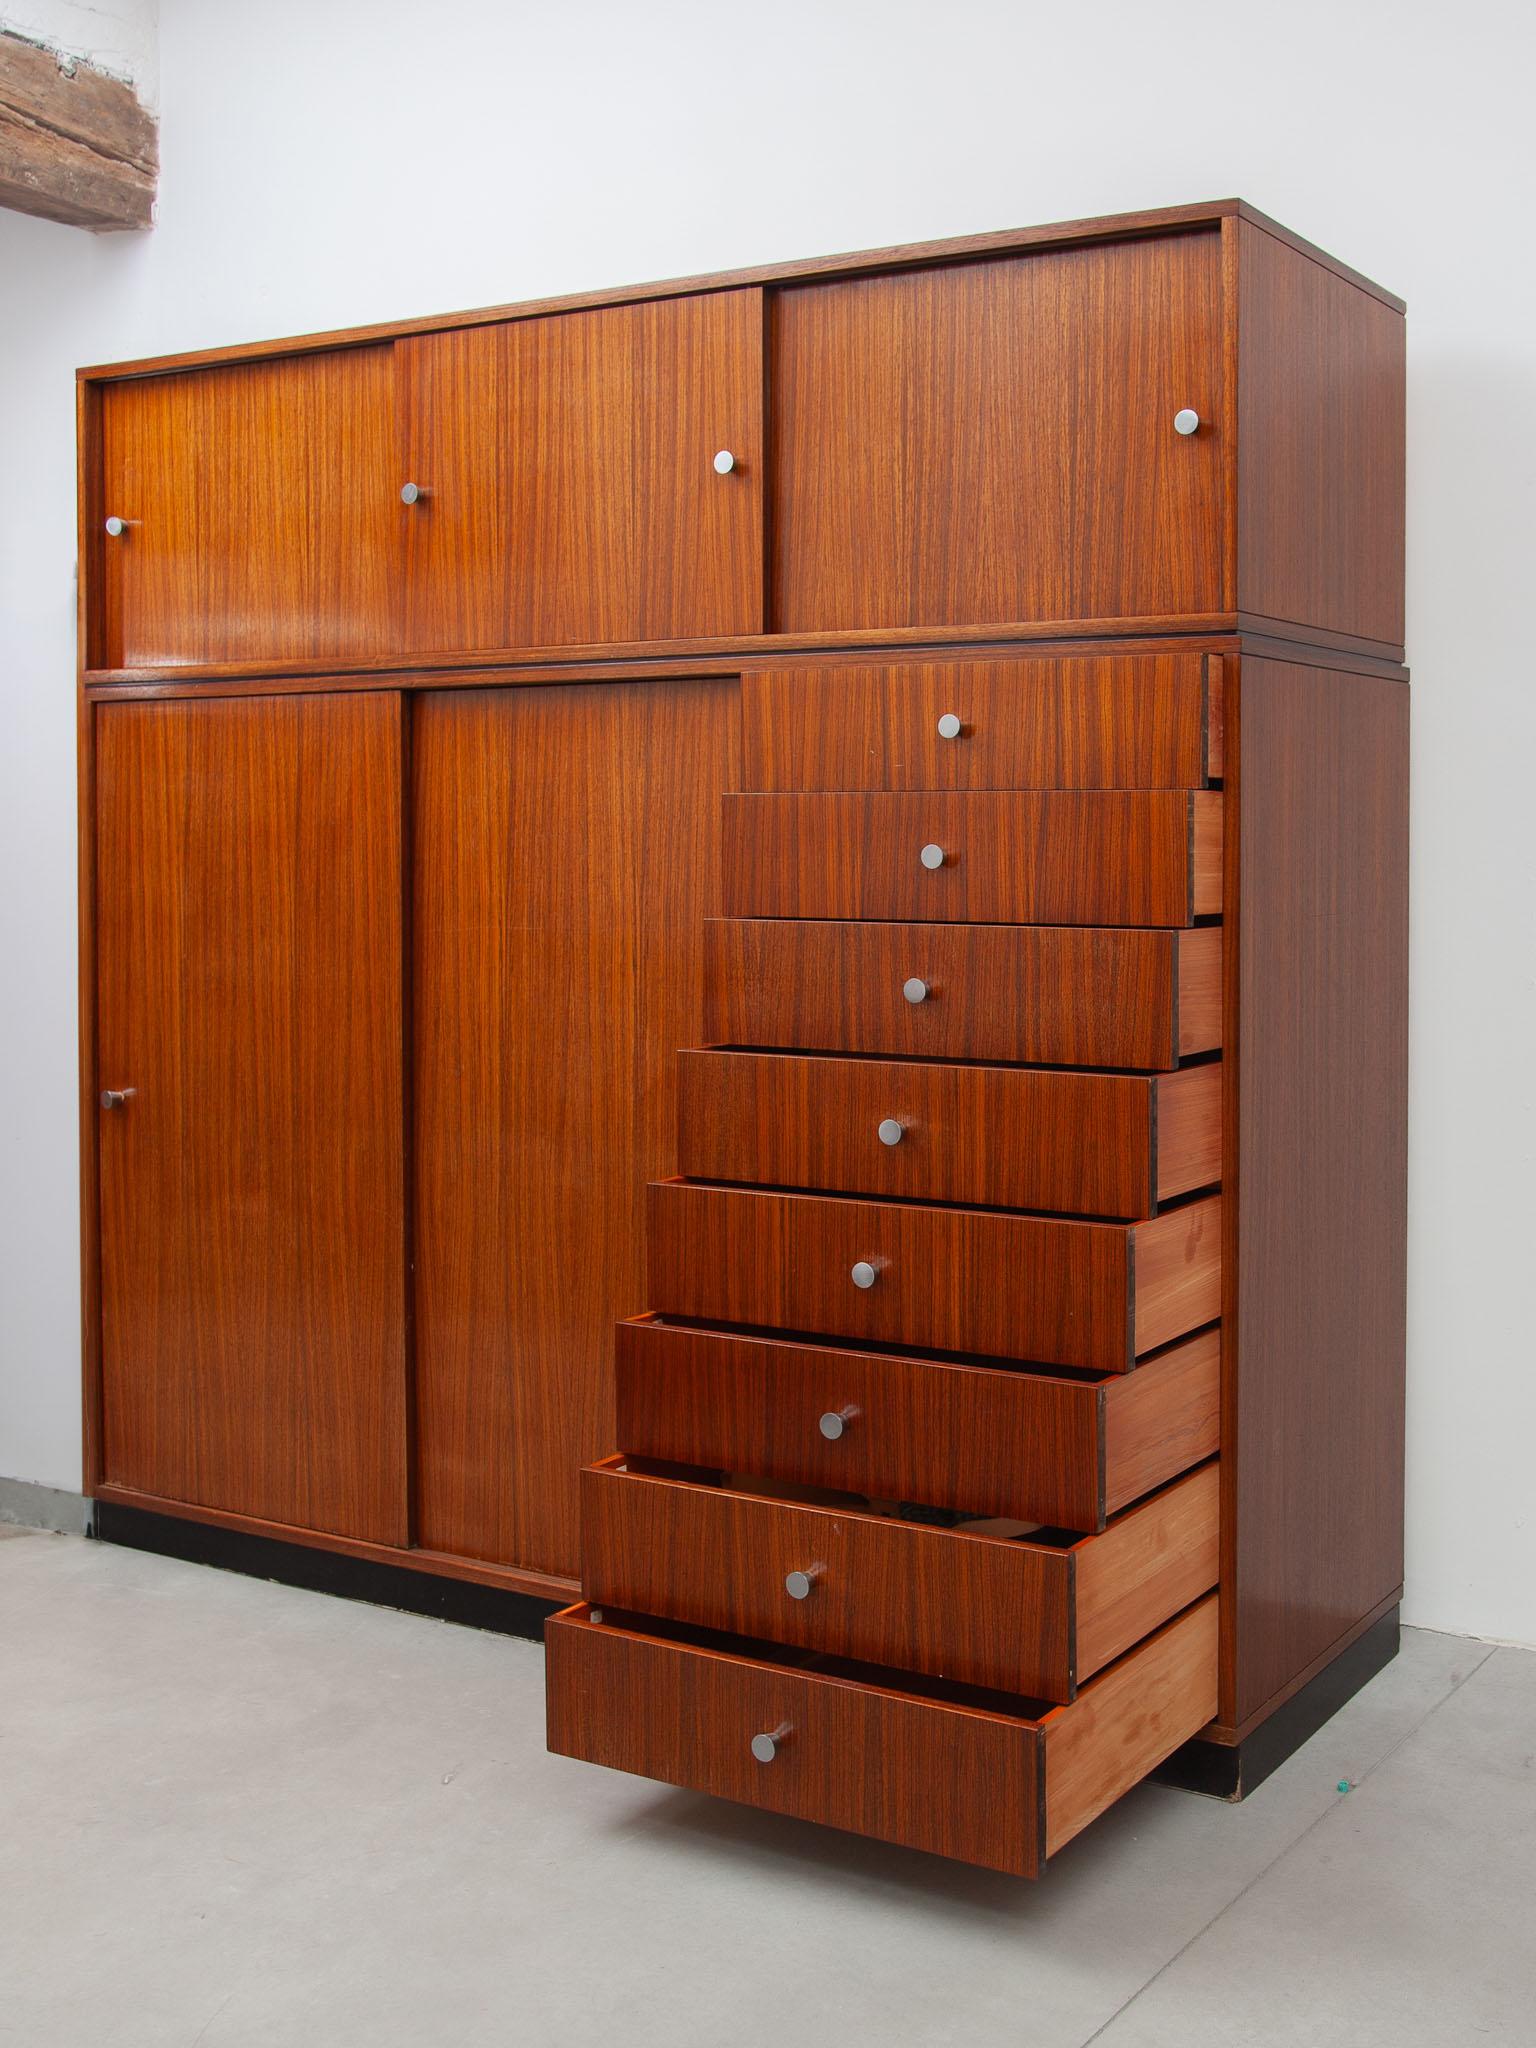 Nutwood Rare Alfred Hendrickx Wardrobe with Eight Drawers 1960, Belform, Belgium  For Sale